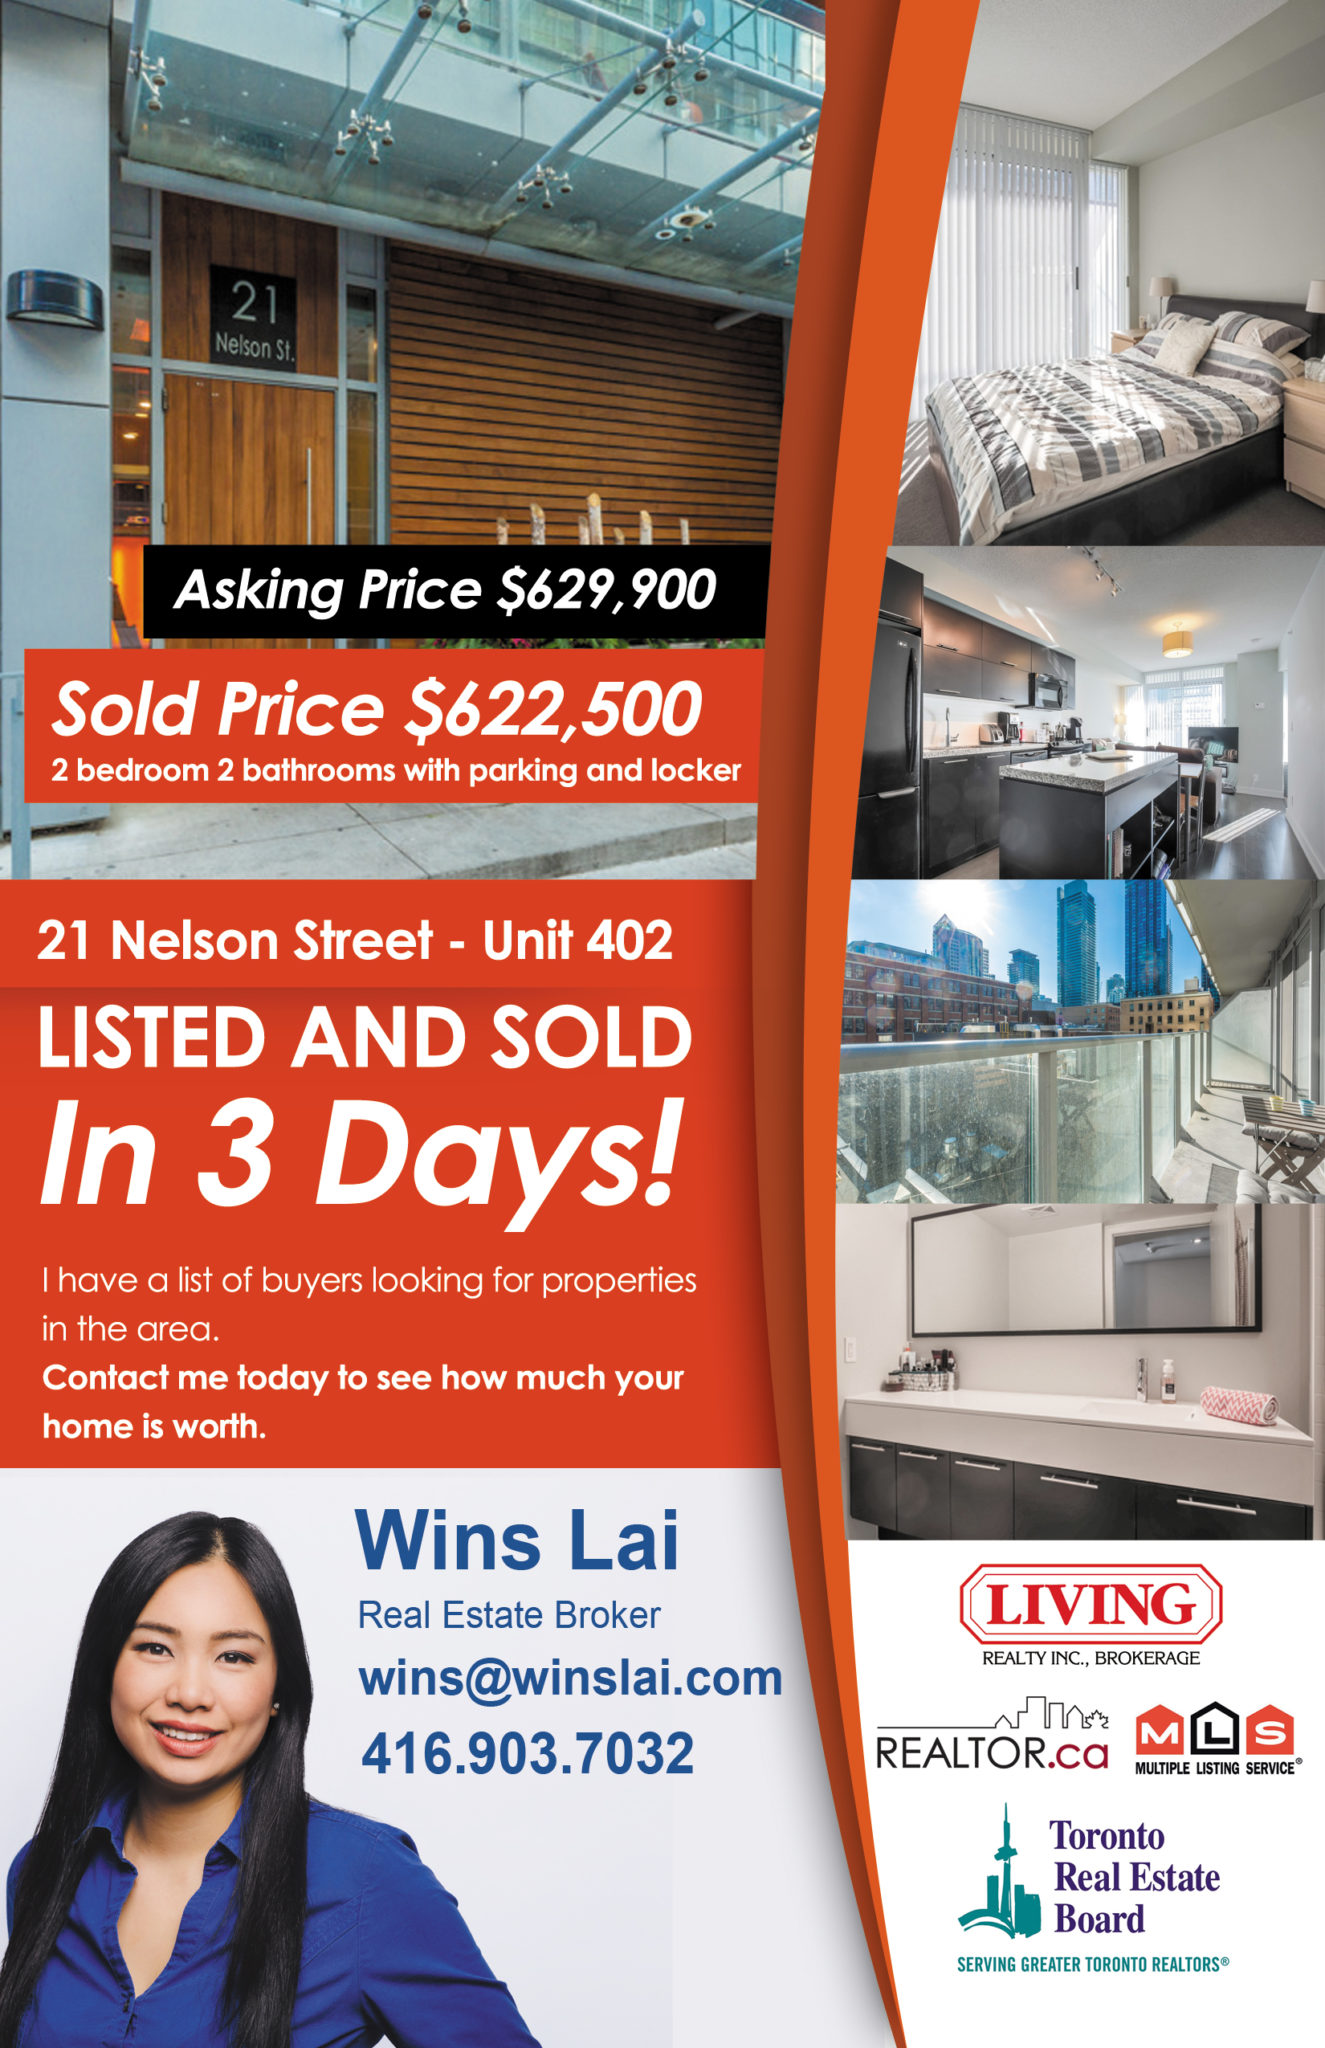 Flyer showing 21 Nelson Street condo listing and sale in 3 days